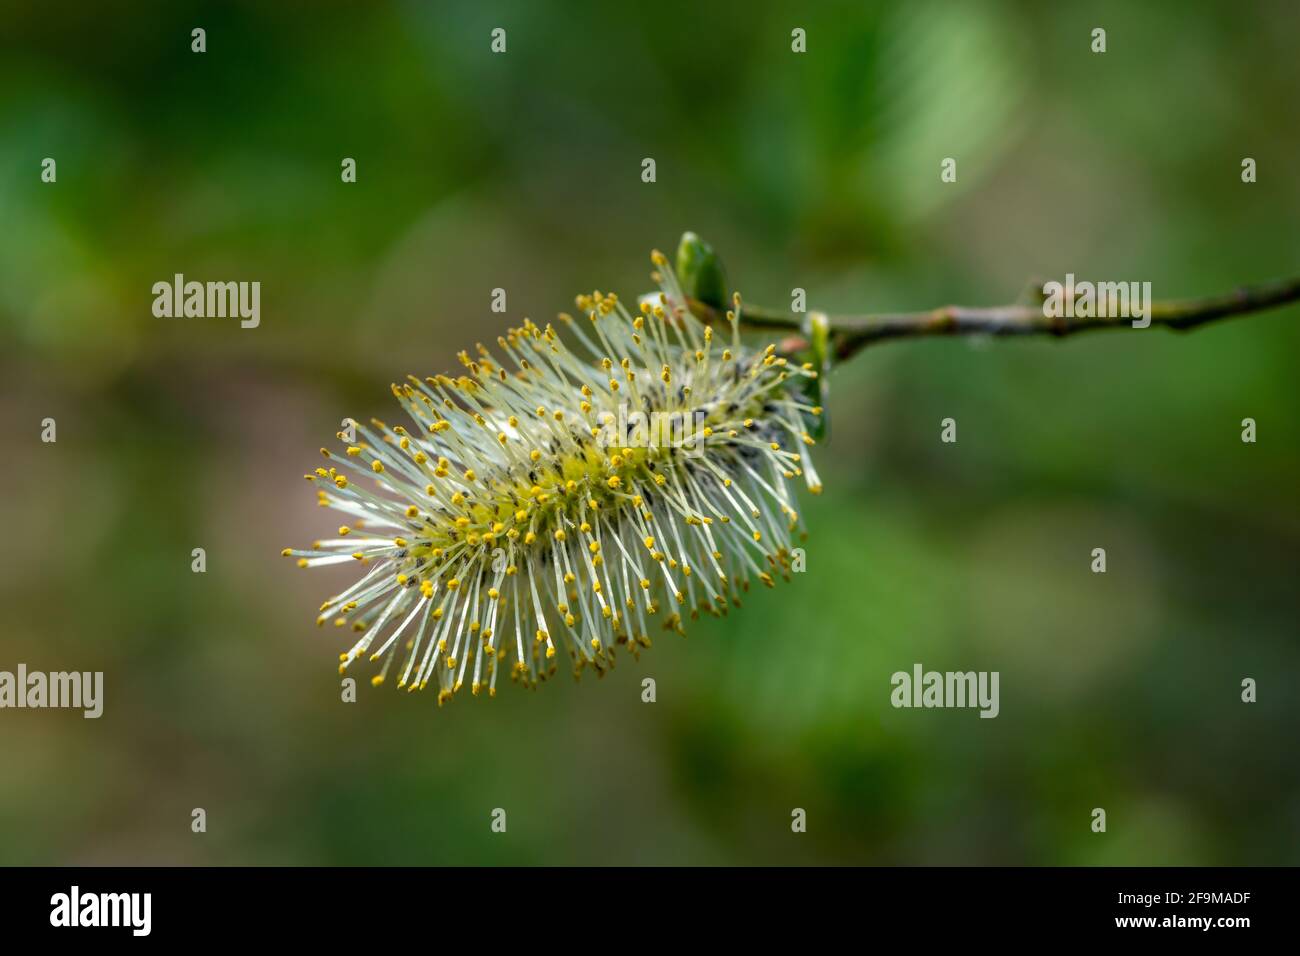 Male flowering catkin of a willow branch Stock Photo